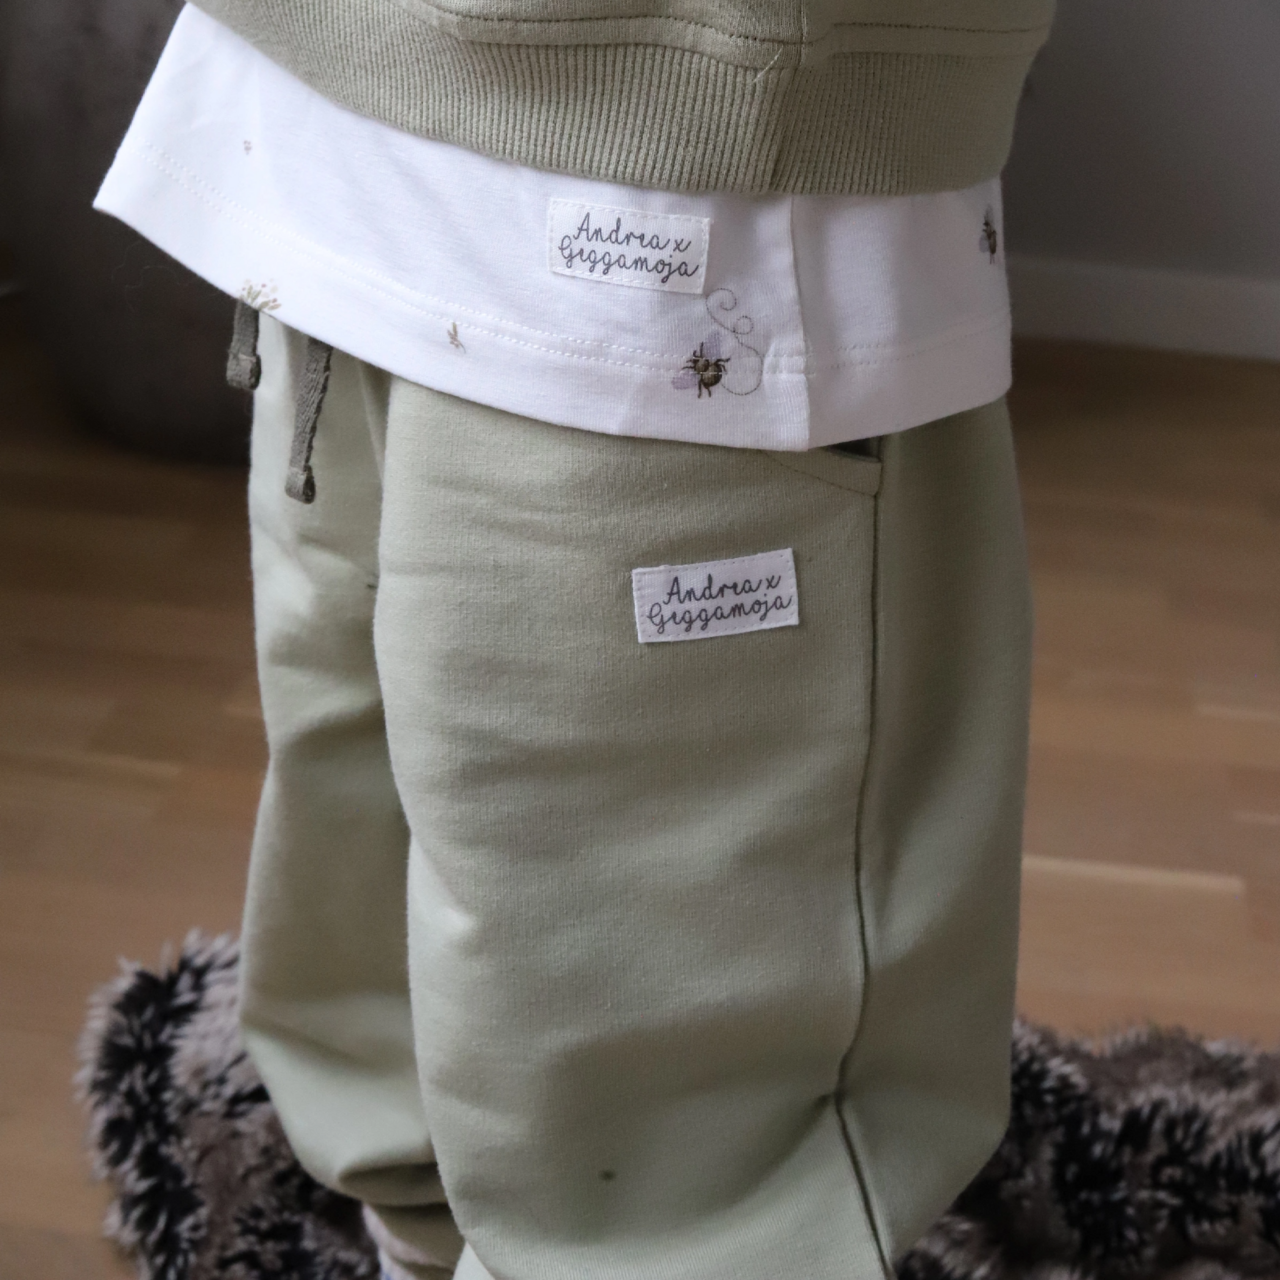 College trousers Olive 86/92